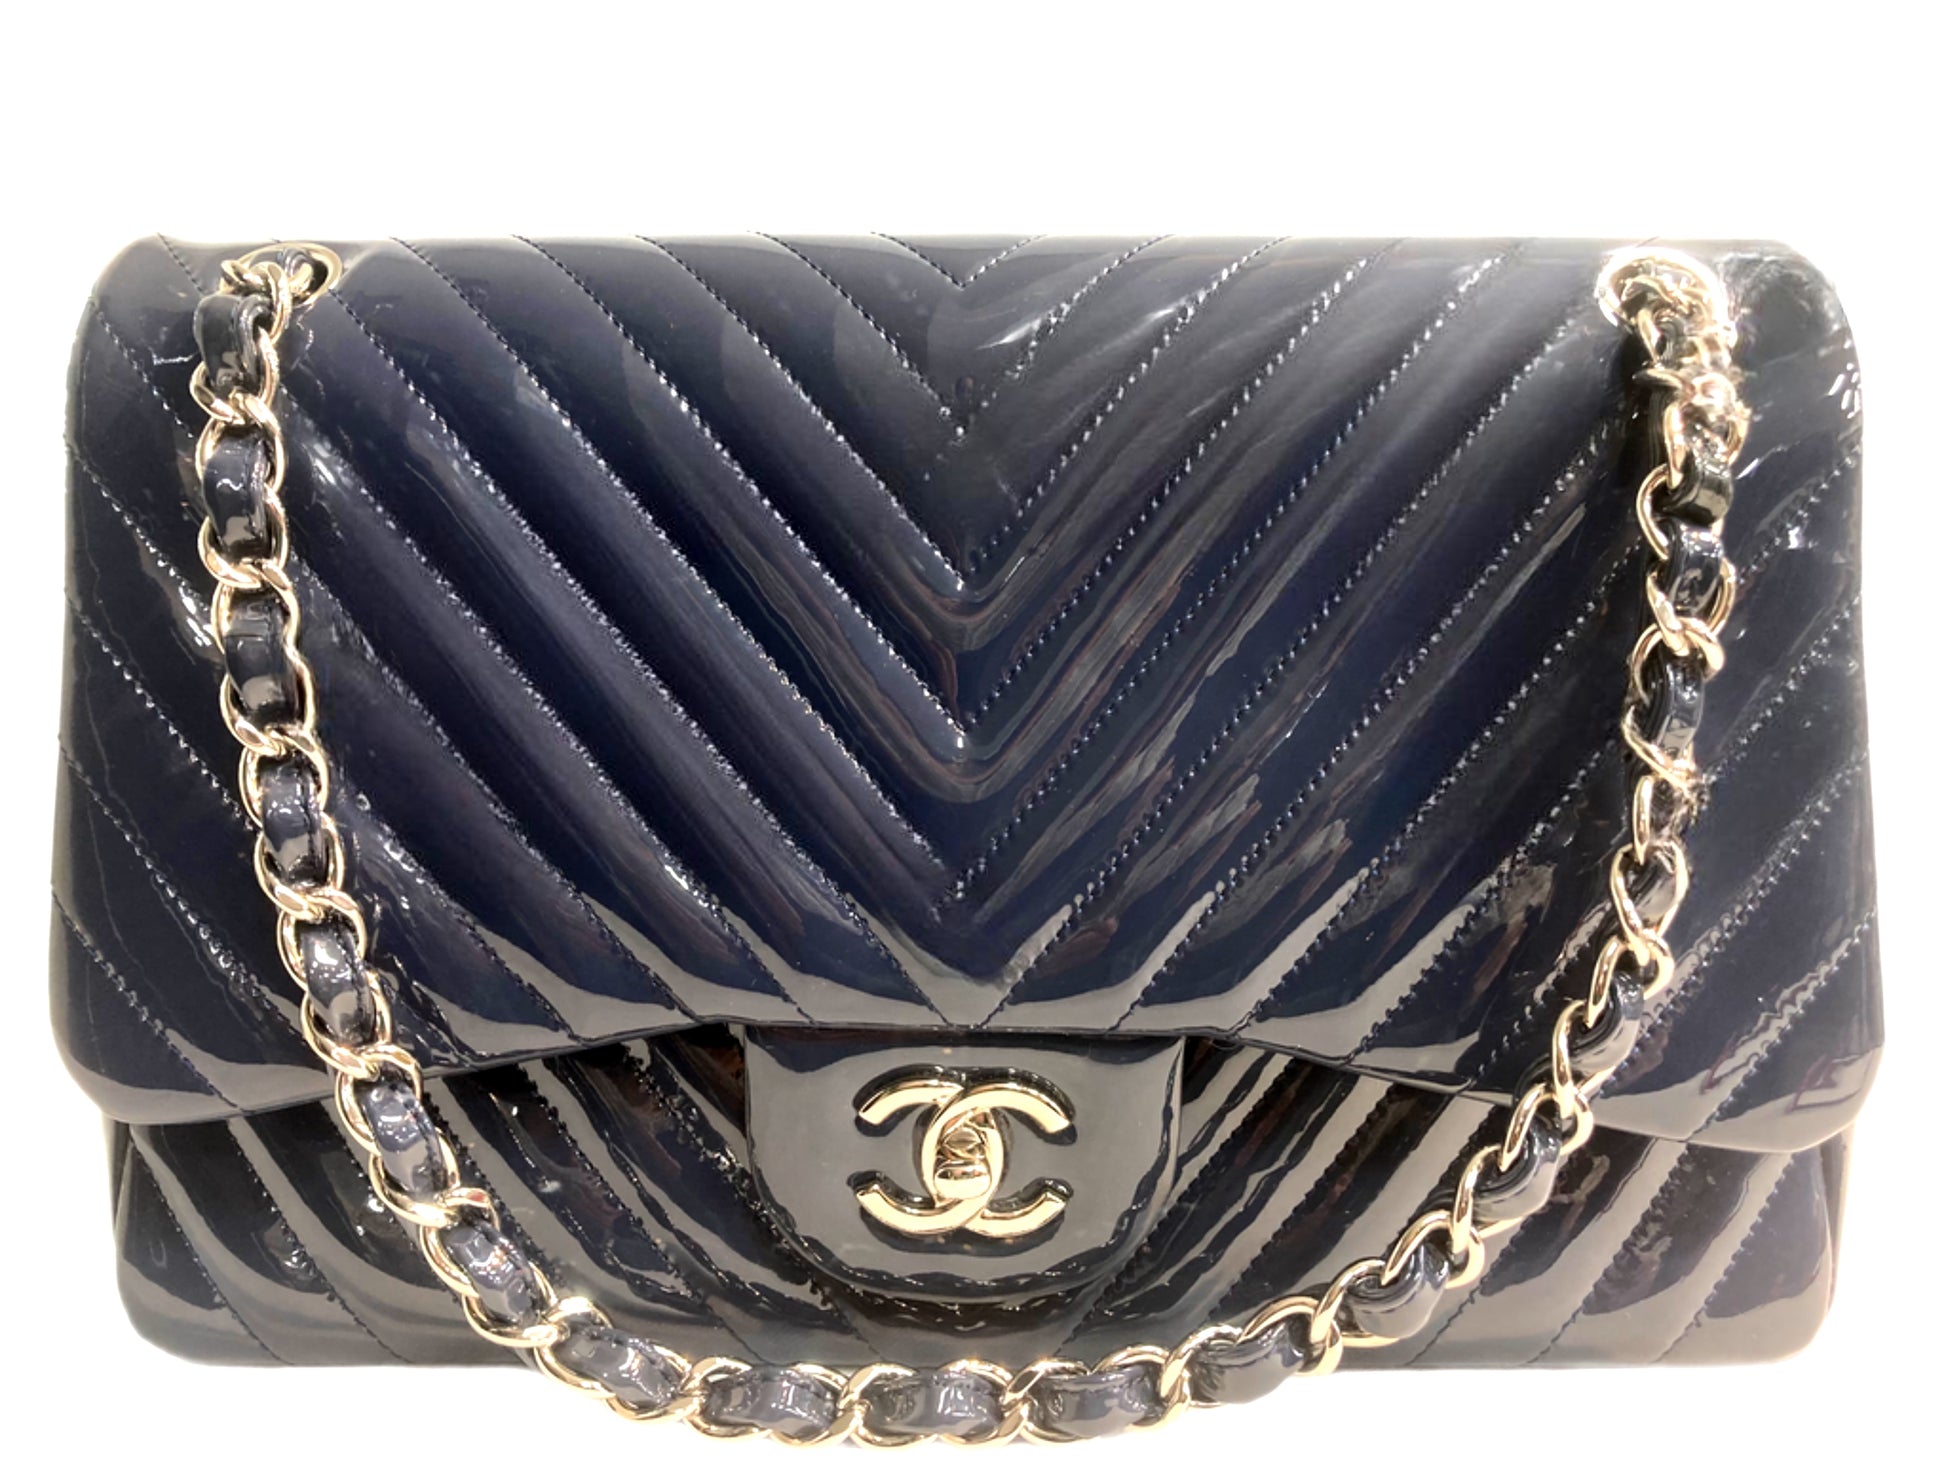 CHANEL, Bags, 0 Authentic Chanel Chevron Grey Patent